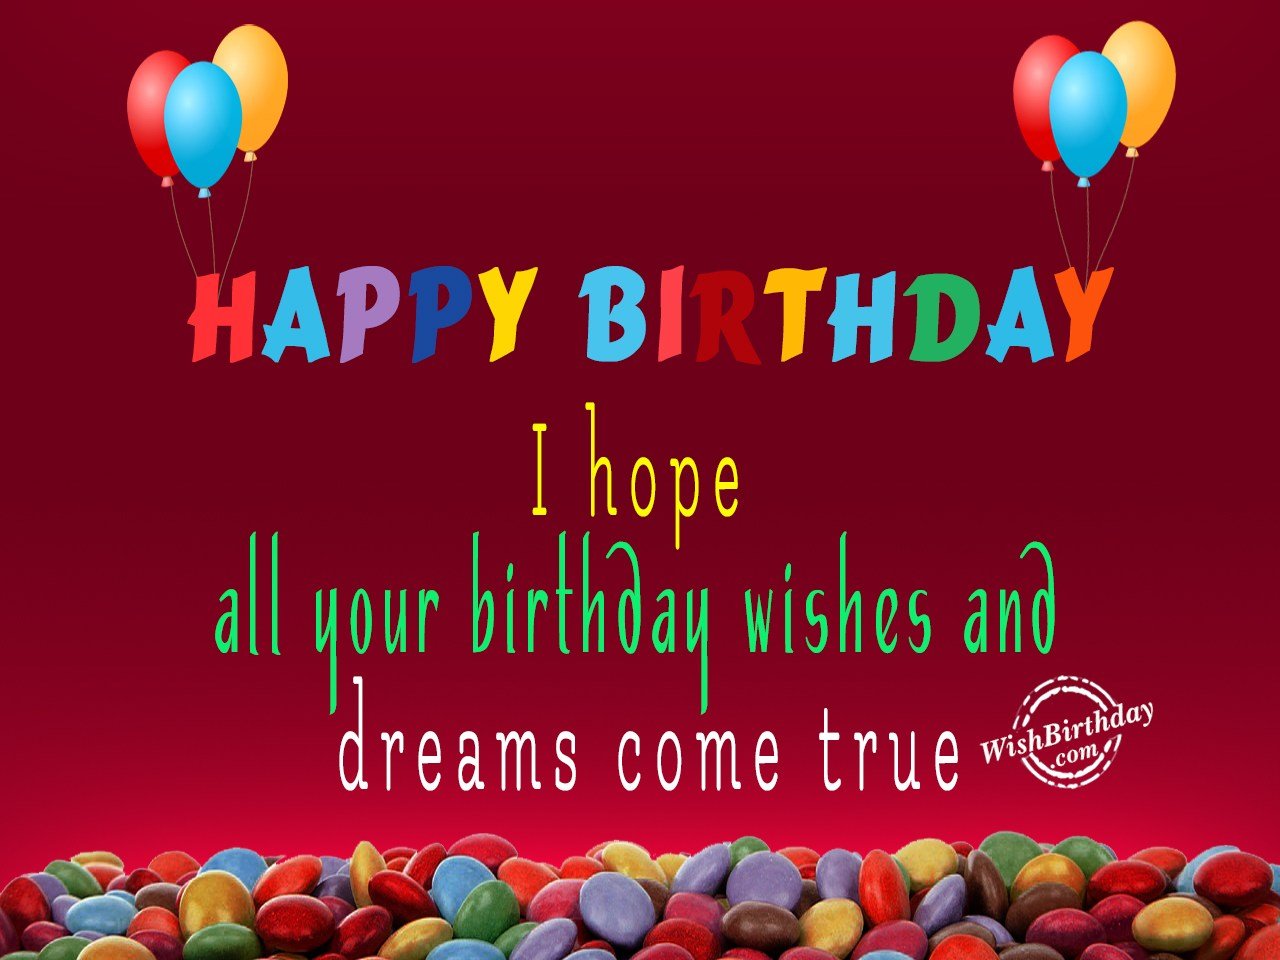 All Your Dreams Come True - Birthday Wishes, Happy Birthday Pictures